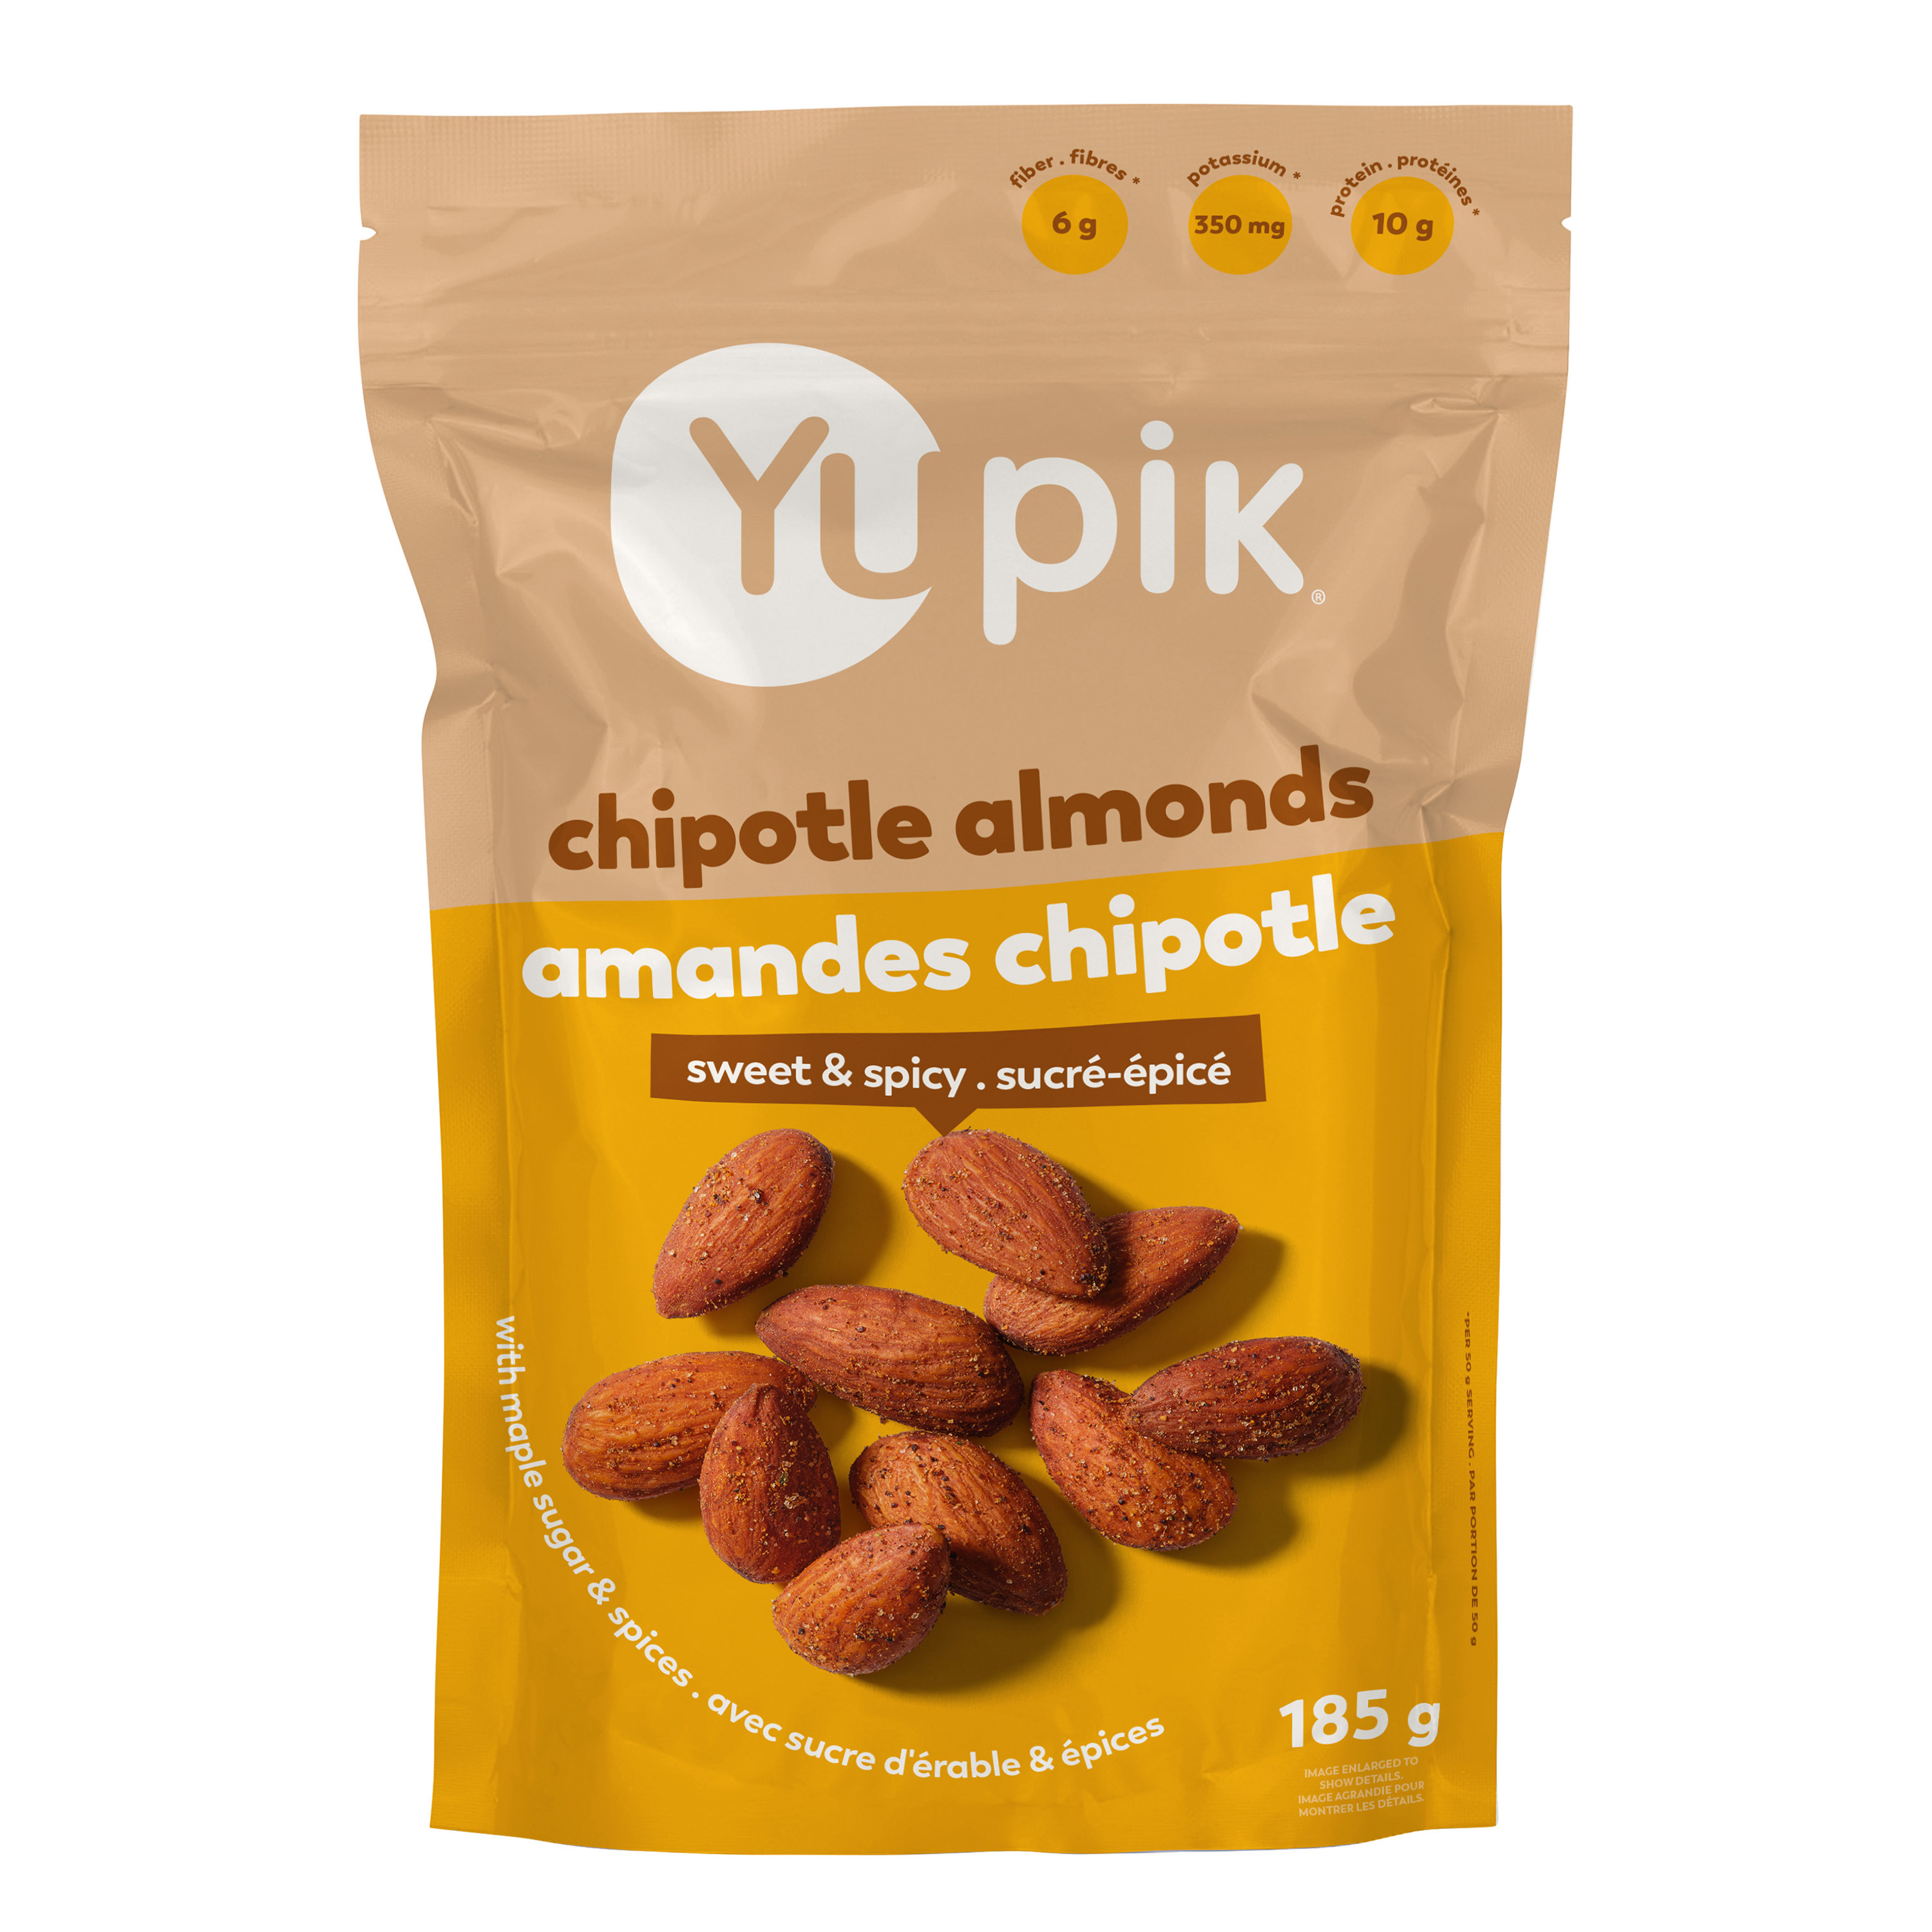 Almonds, Maple chipotle seasoning [spices, herbs, sugar, maple sugar, maltodextrin, salt, dehydrated vegetables (garlic, onion), smoked dehydrated jalapeno pepper, soy sauce (soybeans, wheat, water, salt), dehydrated poblano pepper, canola oil, paprika extract, natural flavour], Vegetable oil